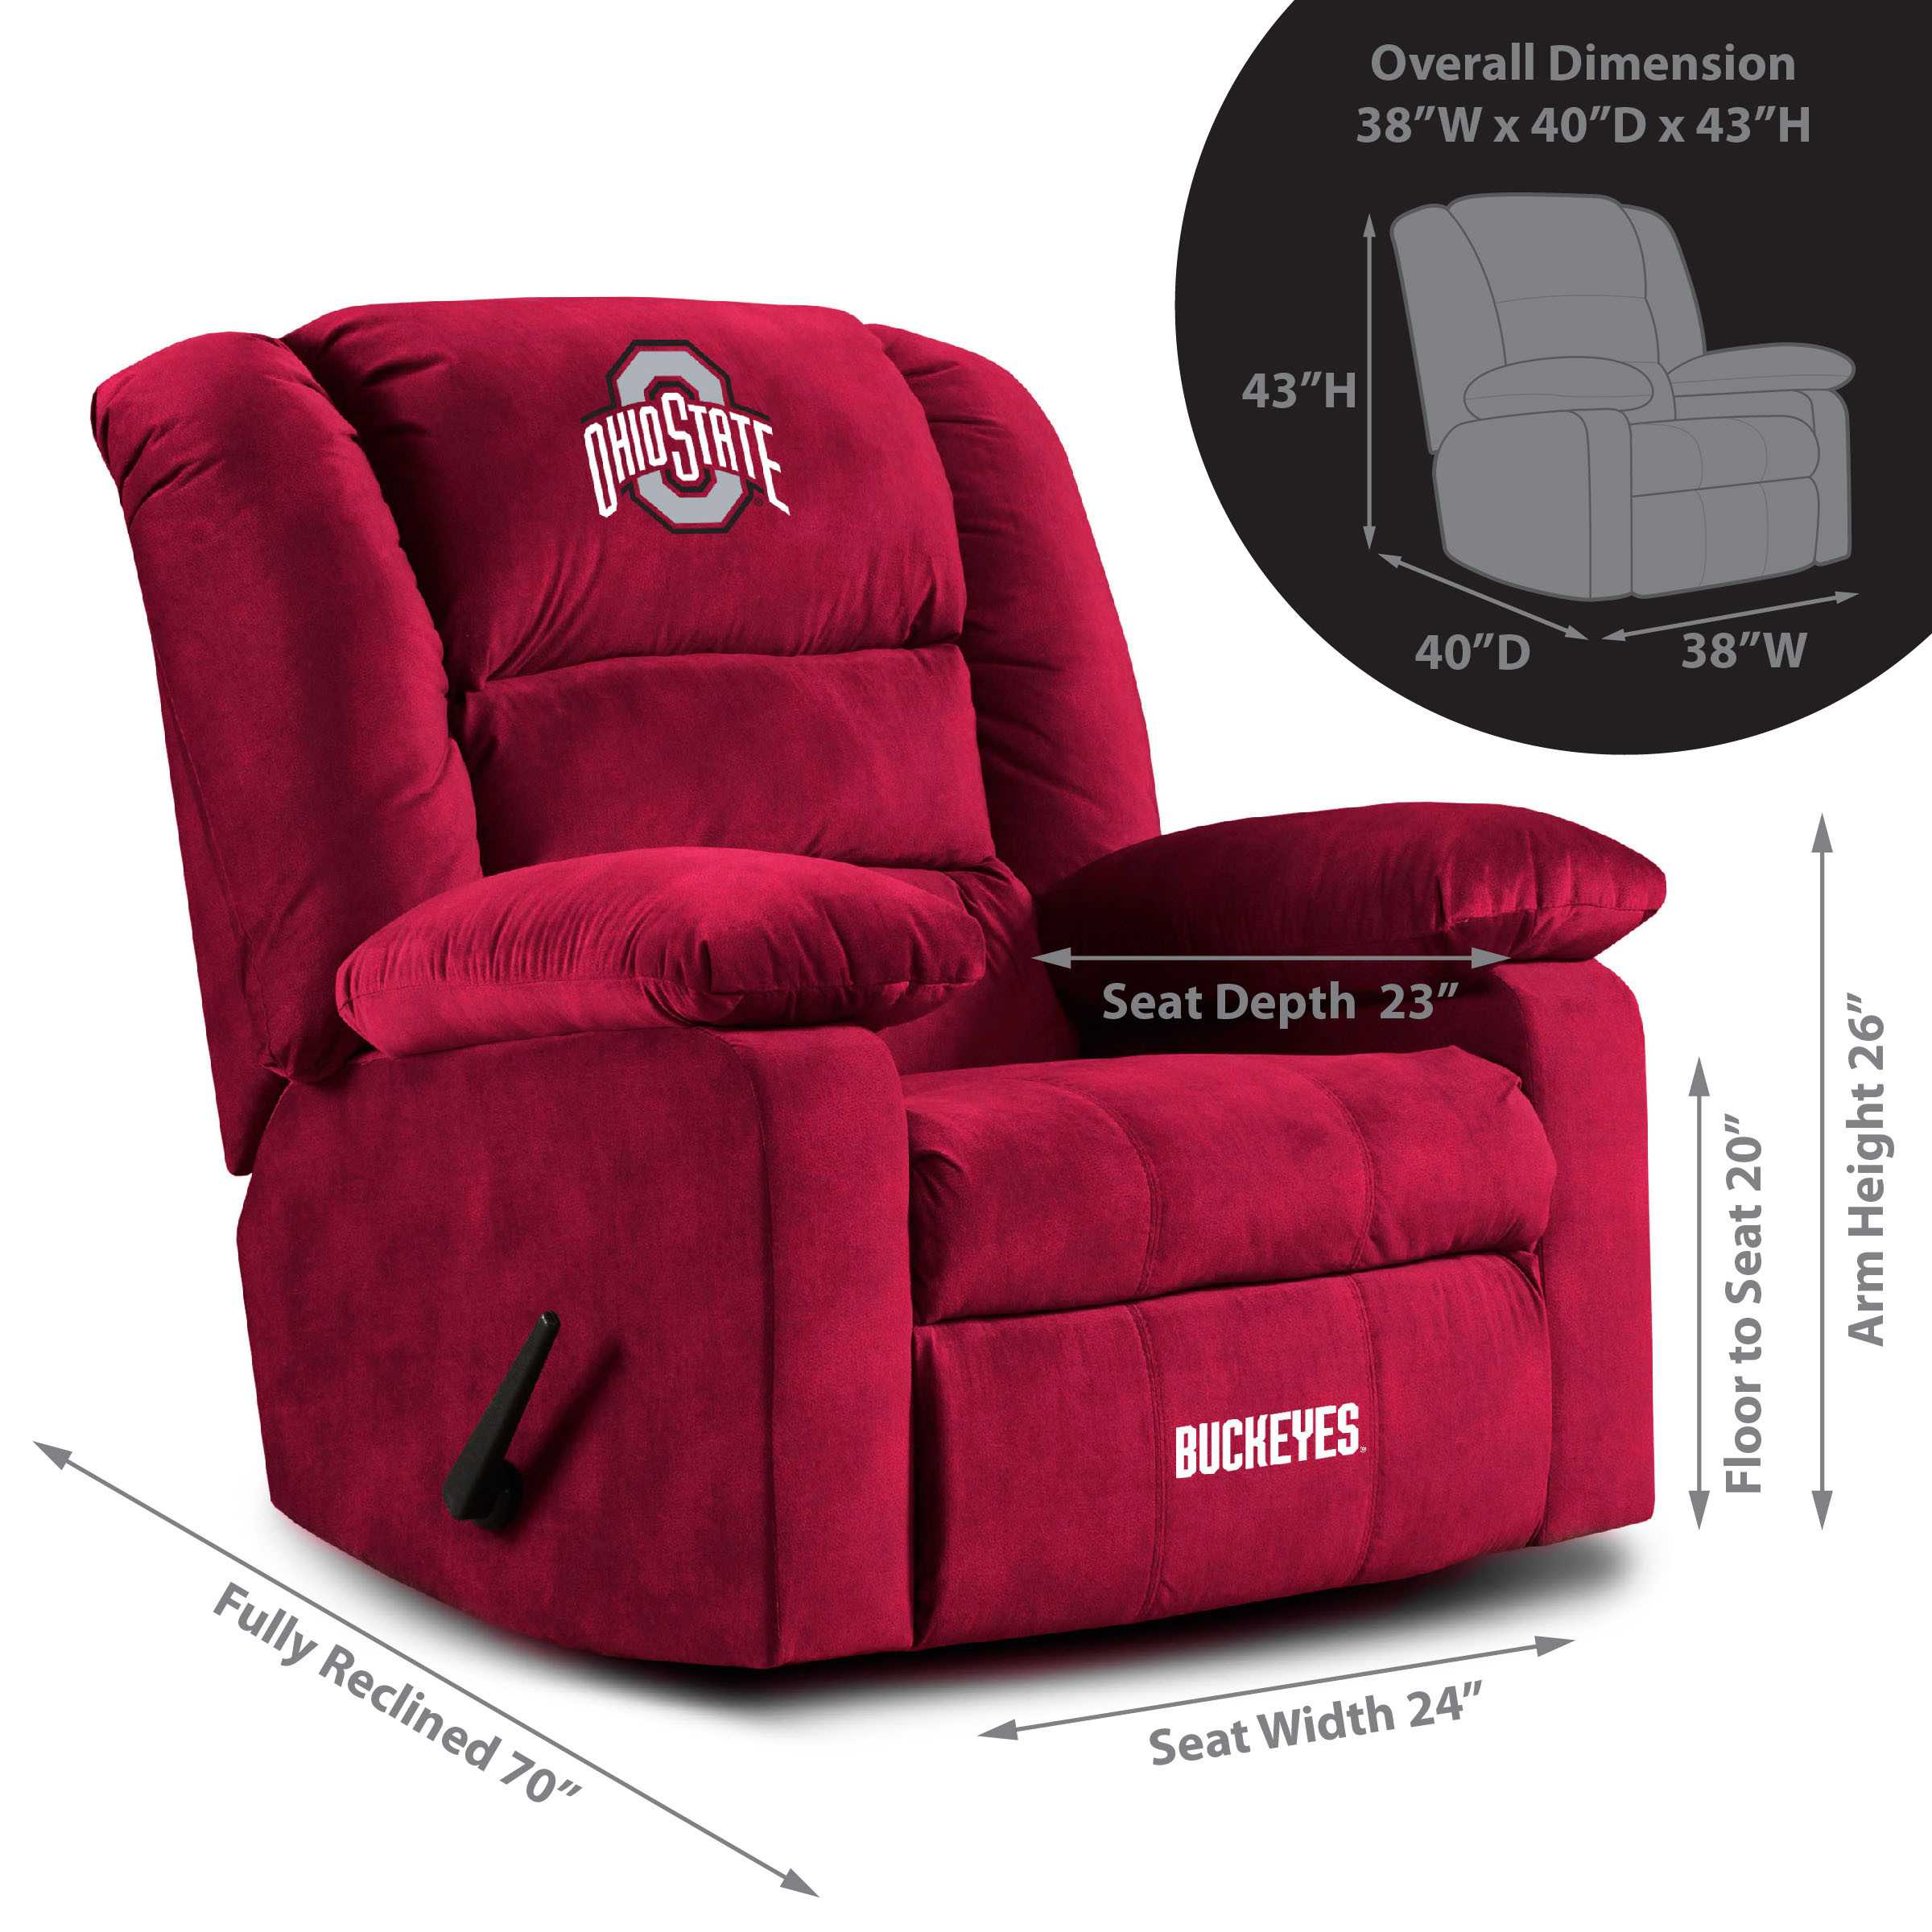 OHIO STATE RED PLAYOFF RECLINER